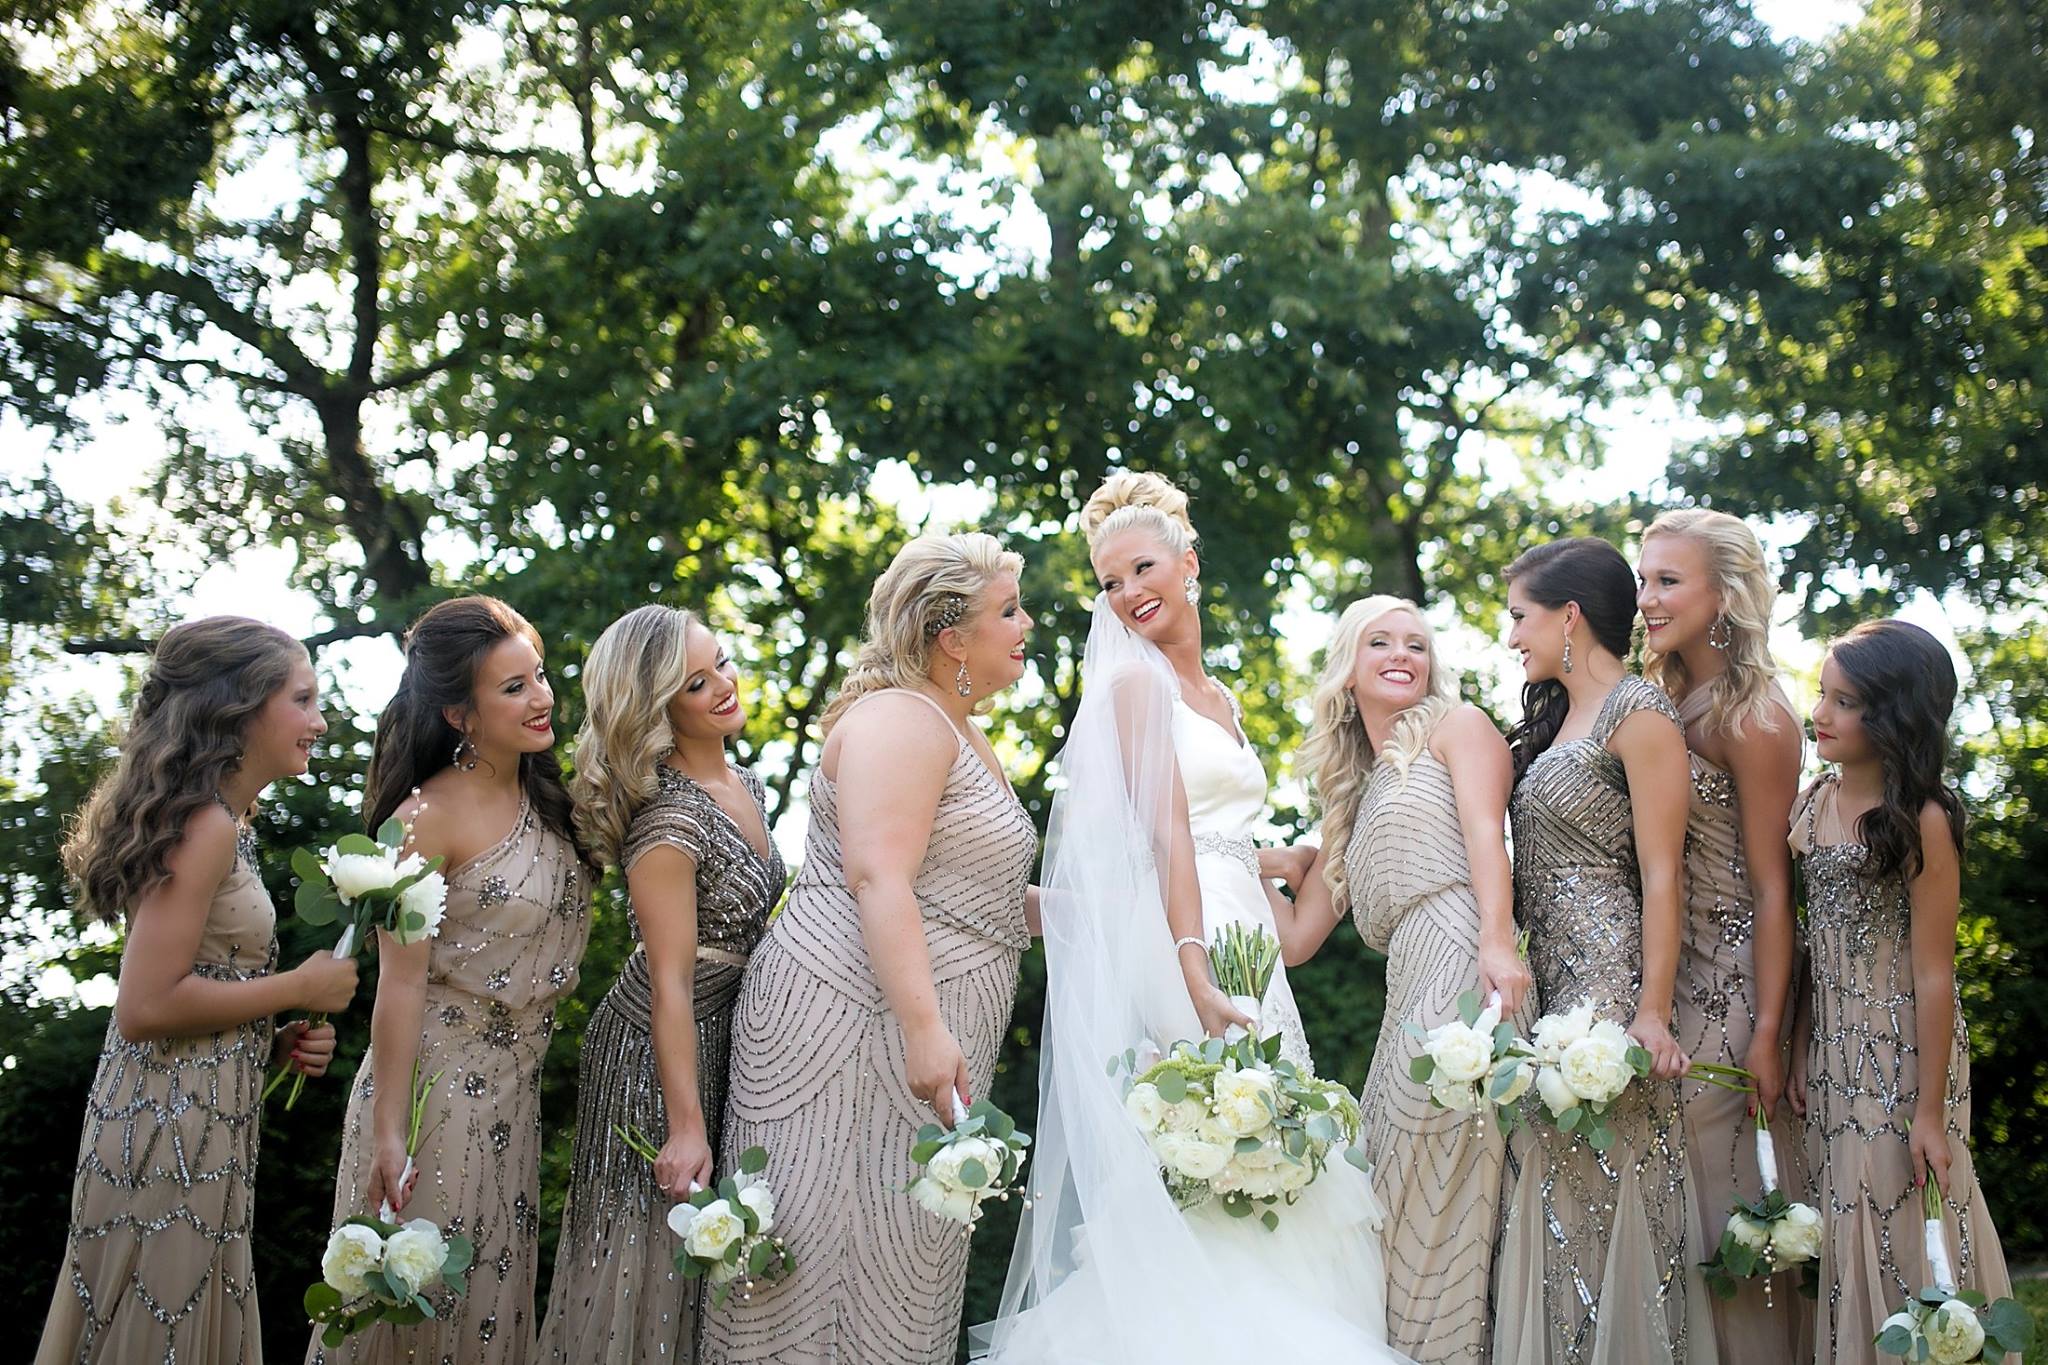 Wedding Wednesday Introducing Bridal Party | love 'n' labels www.lovenlabels.com